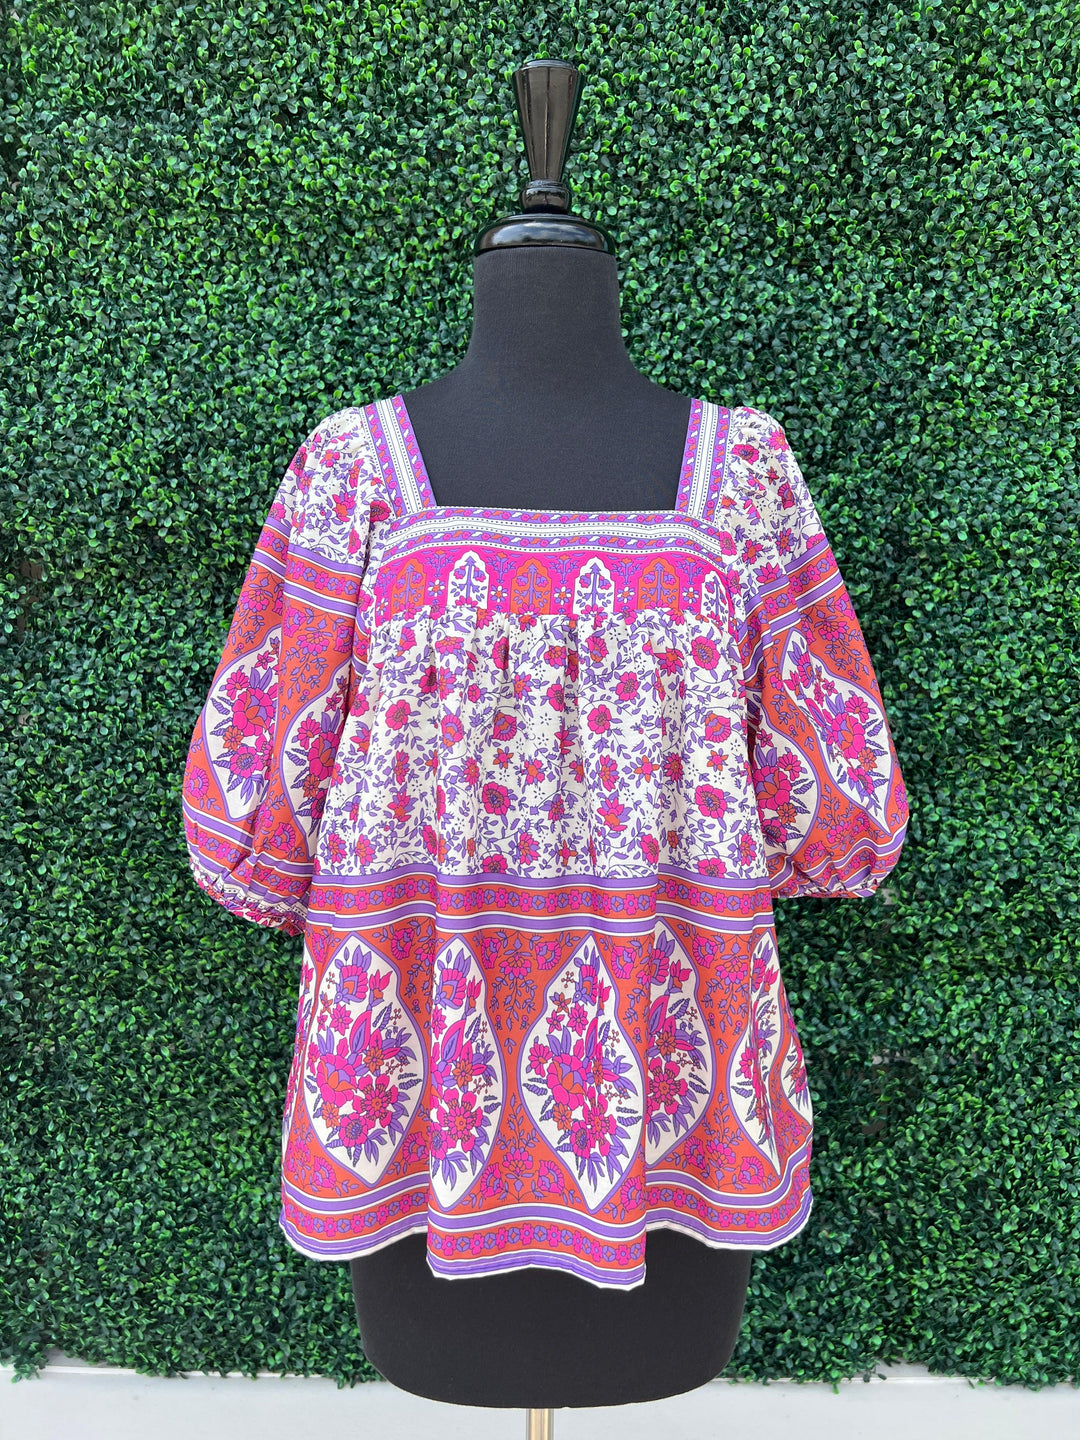 Jade brand boarder print blouse magenta and purple tres chic houston